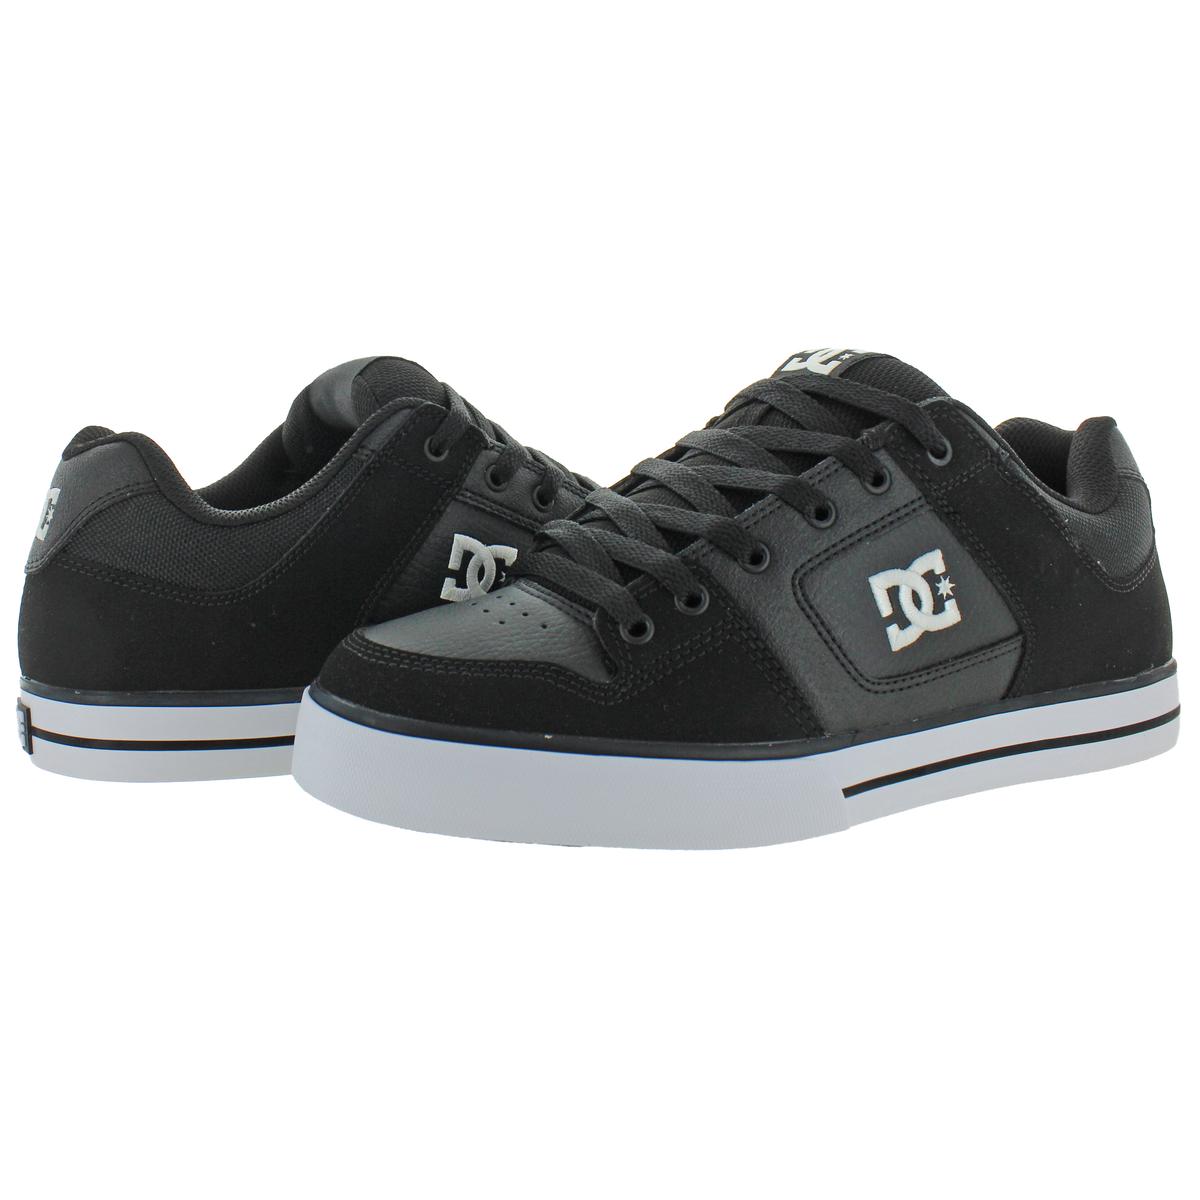 DC mens Cure Casual Low Top Skate Shoes Sneakers 